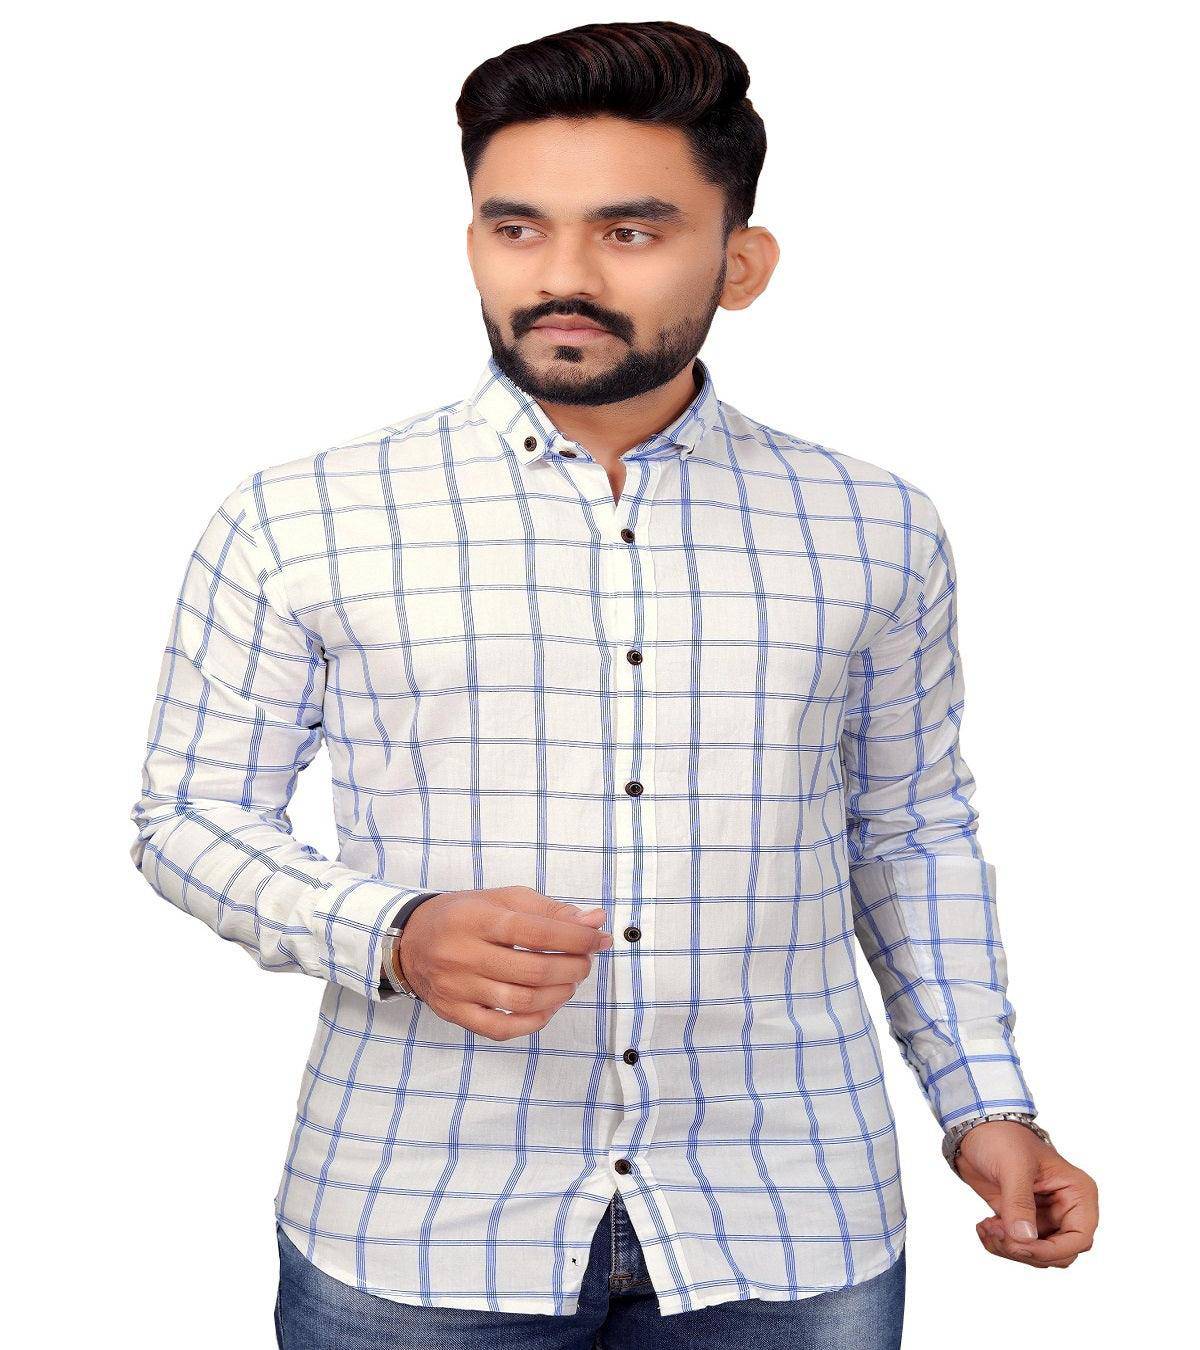 UD FABRIC Men Full Sleeve Cotton Casual Check Shirts - Blue - UD FABRIC - Your Style our Design